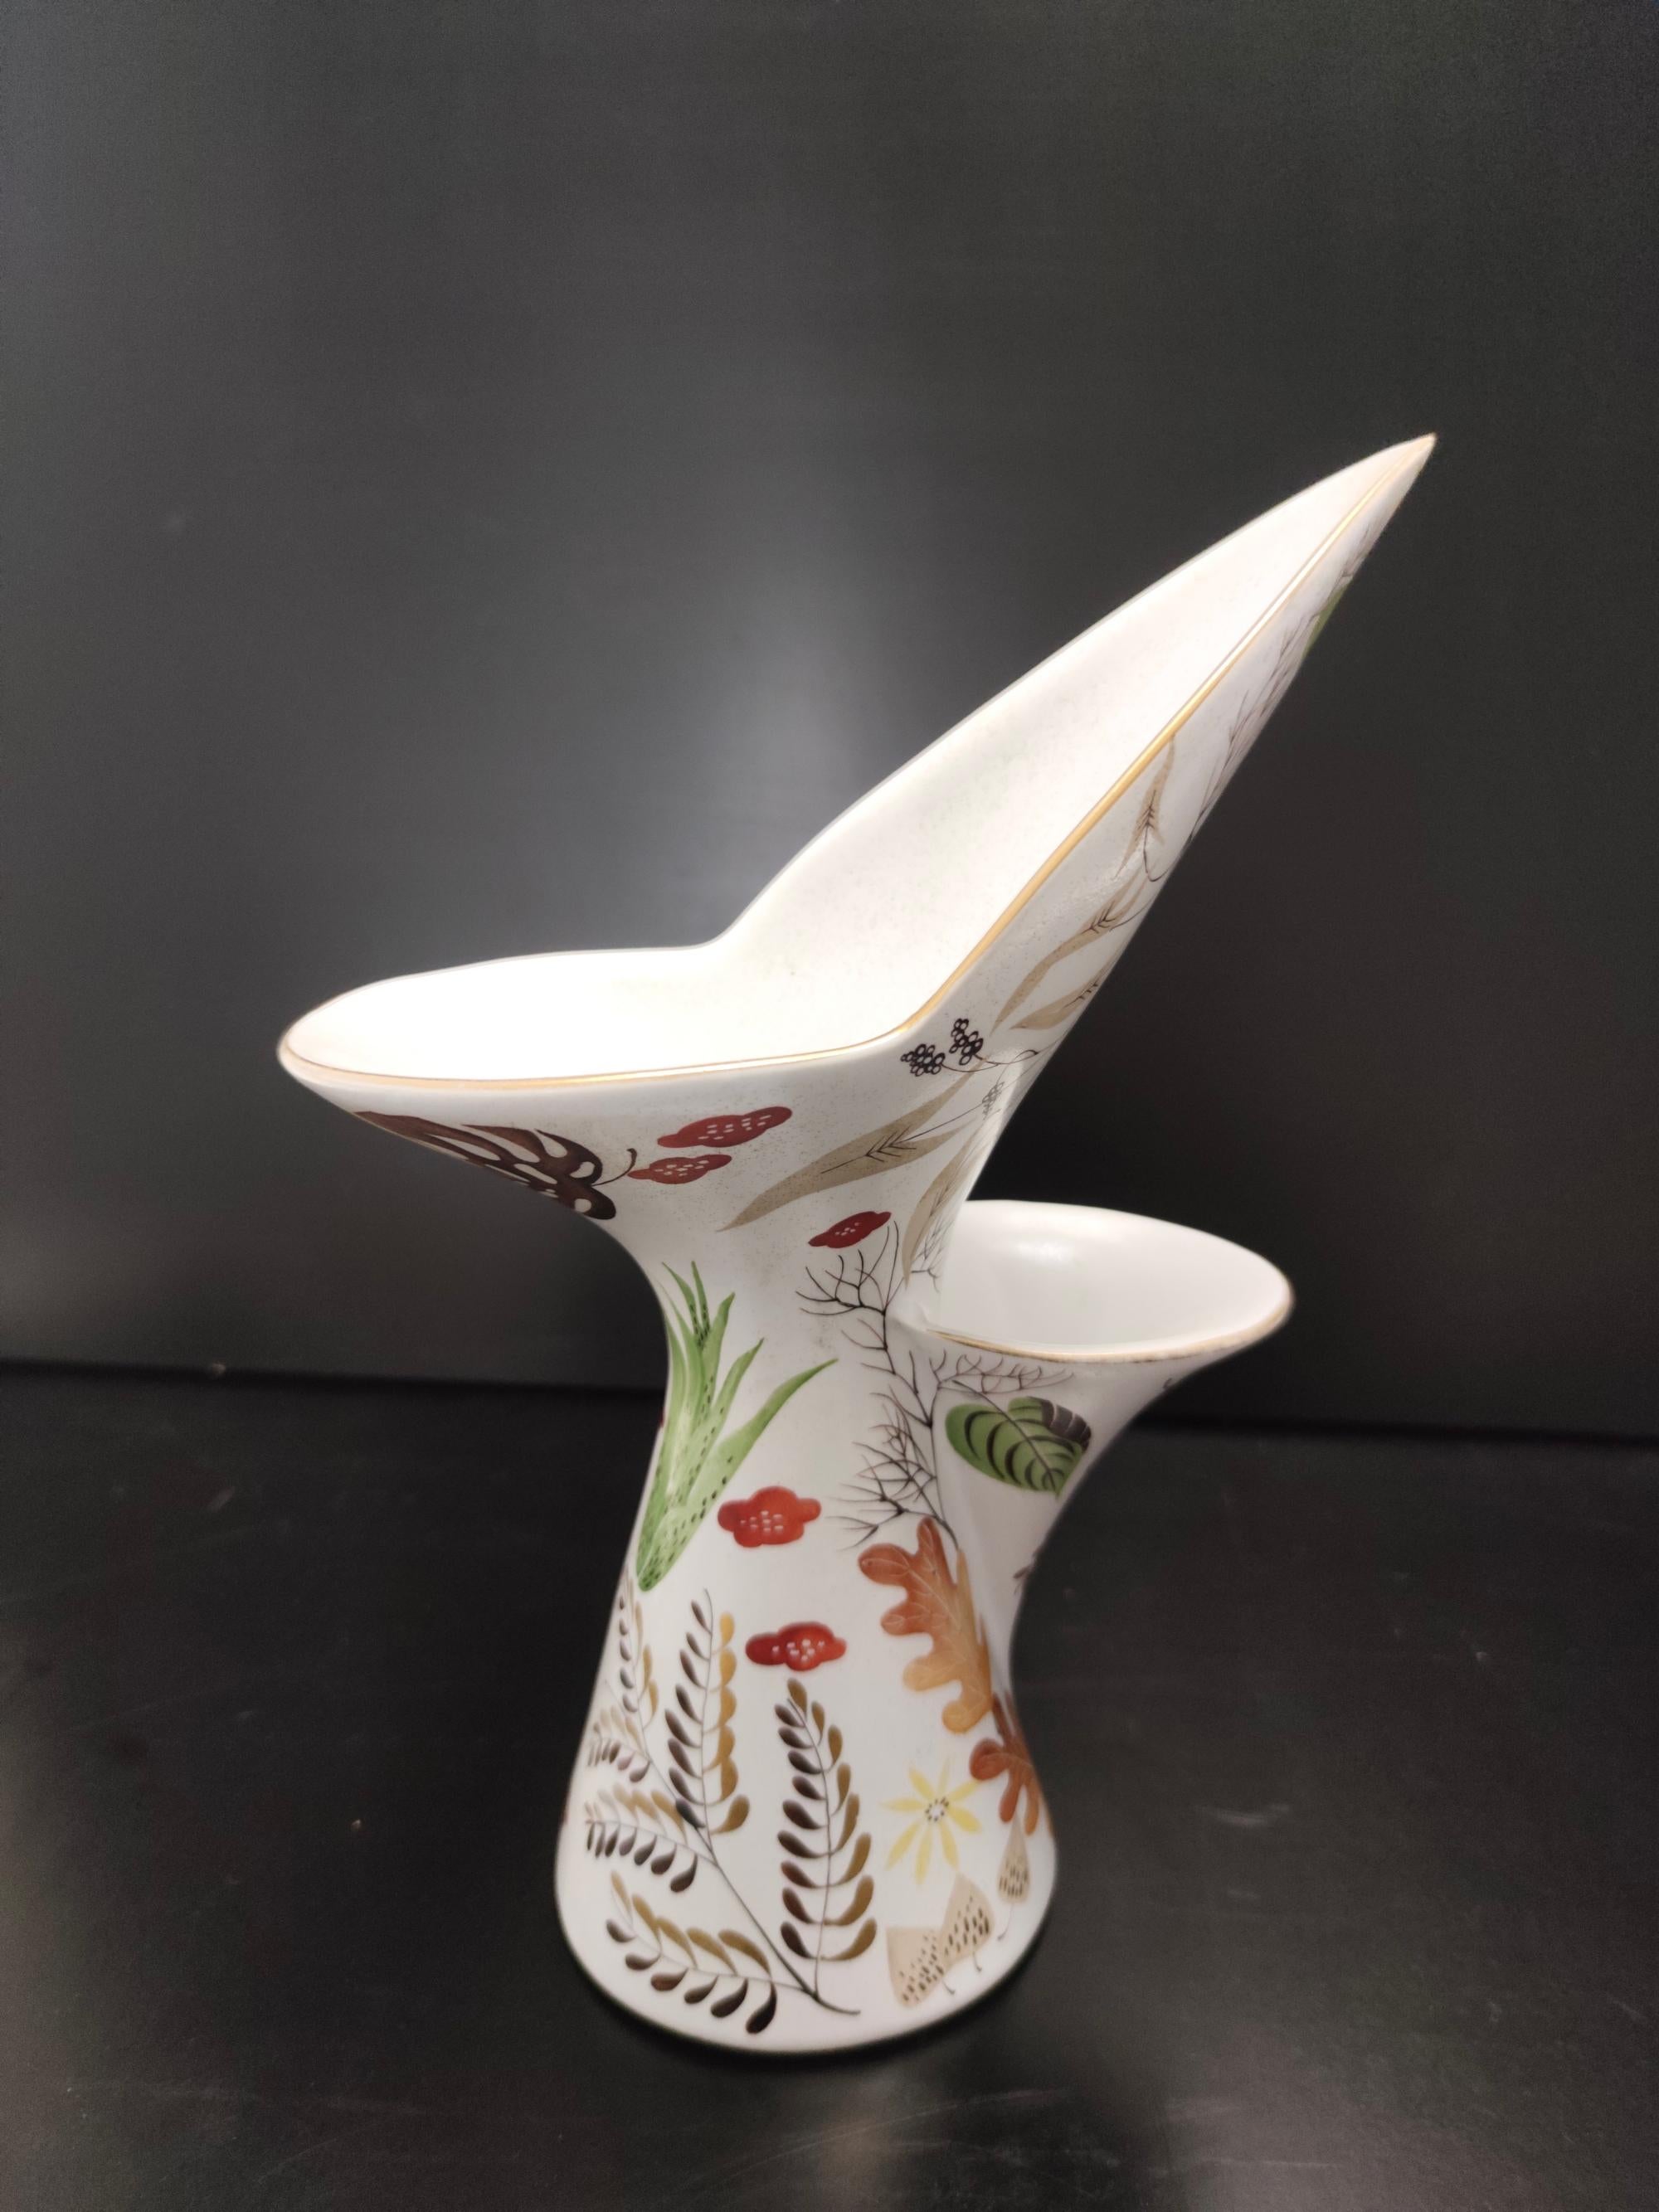 Glazed Rare Vintage Hand-painted Ceramic Vase by Antonia Campi for Lavenia, Italy For Sale